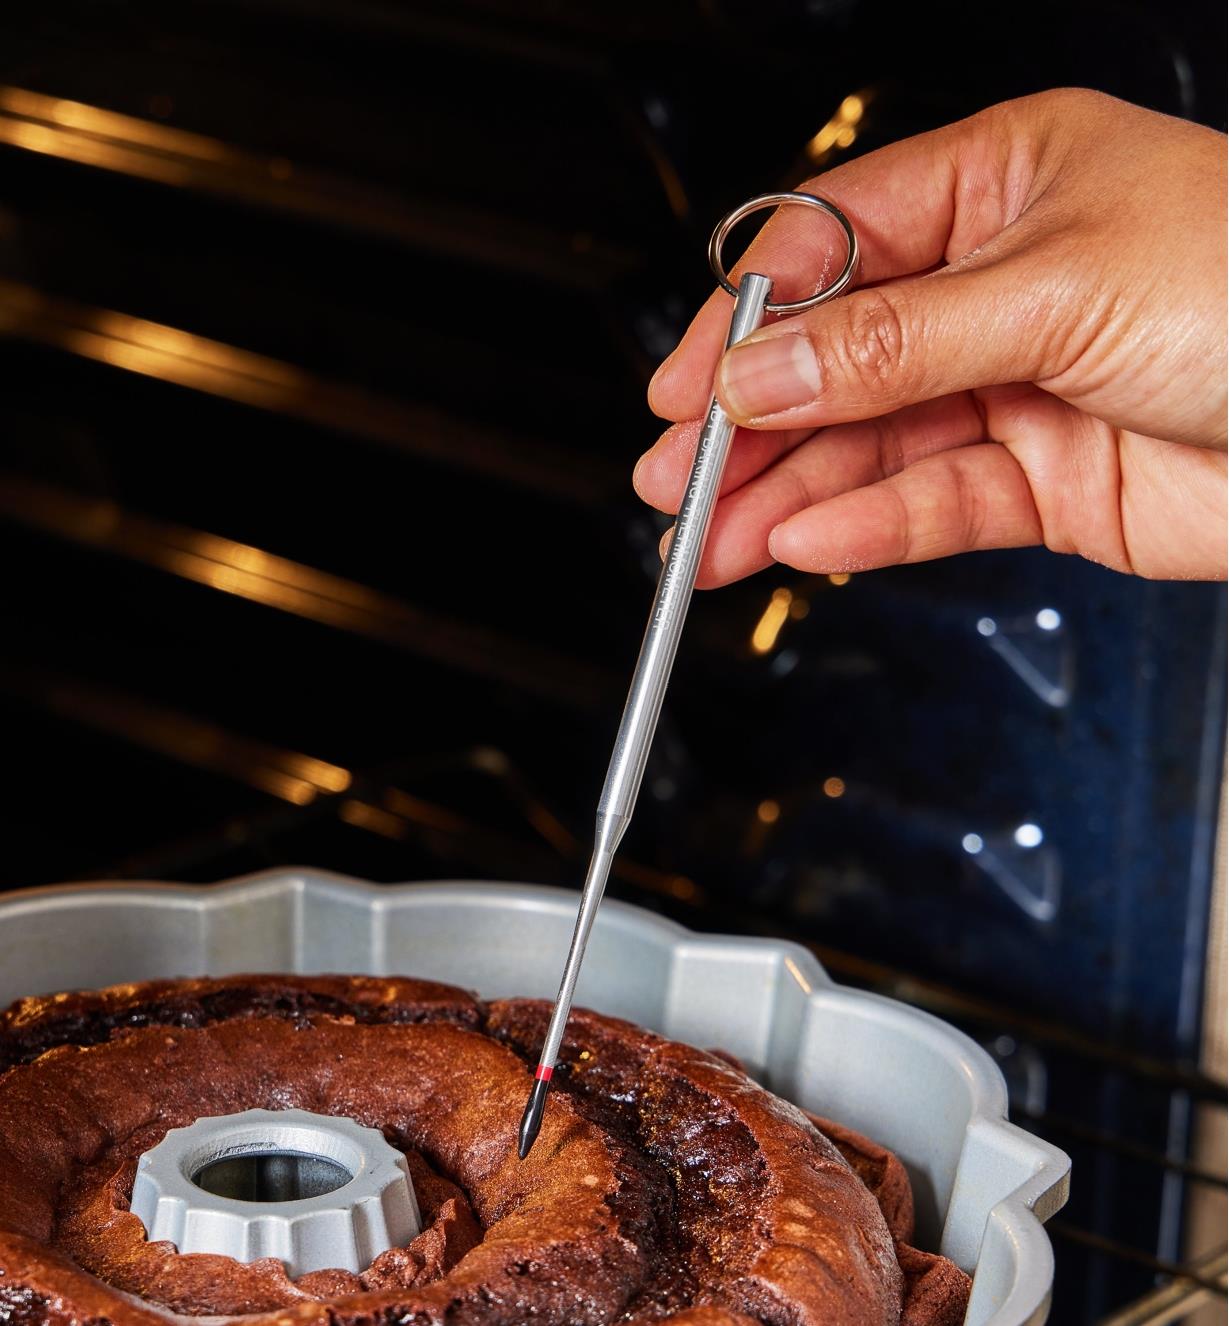 A cake tester with a black tip being inserted into a Bundt cake